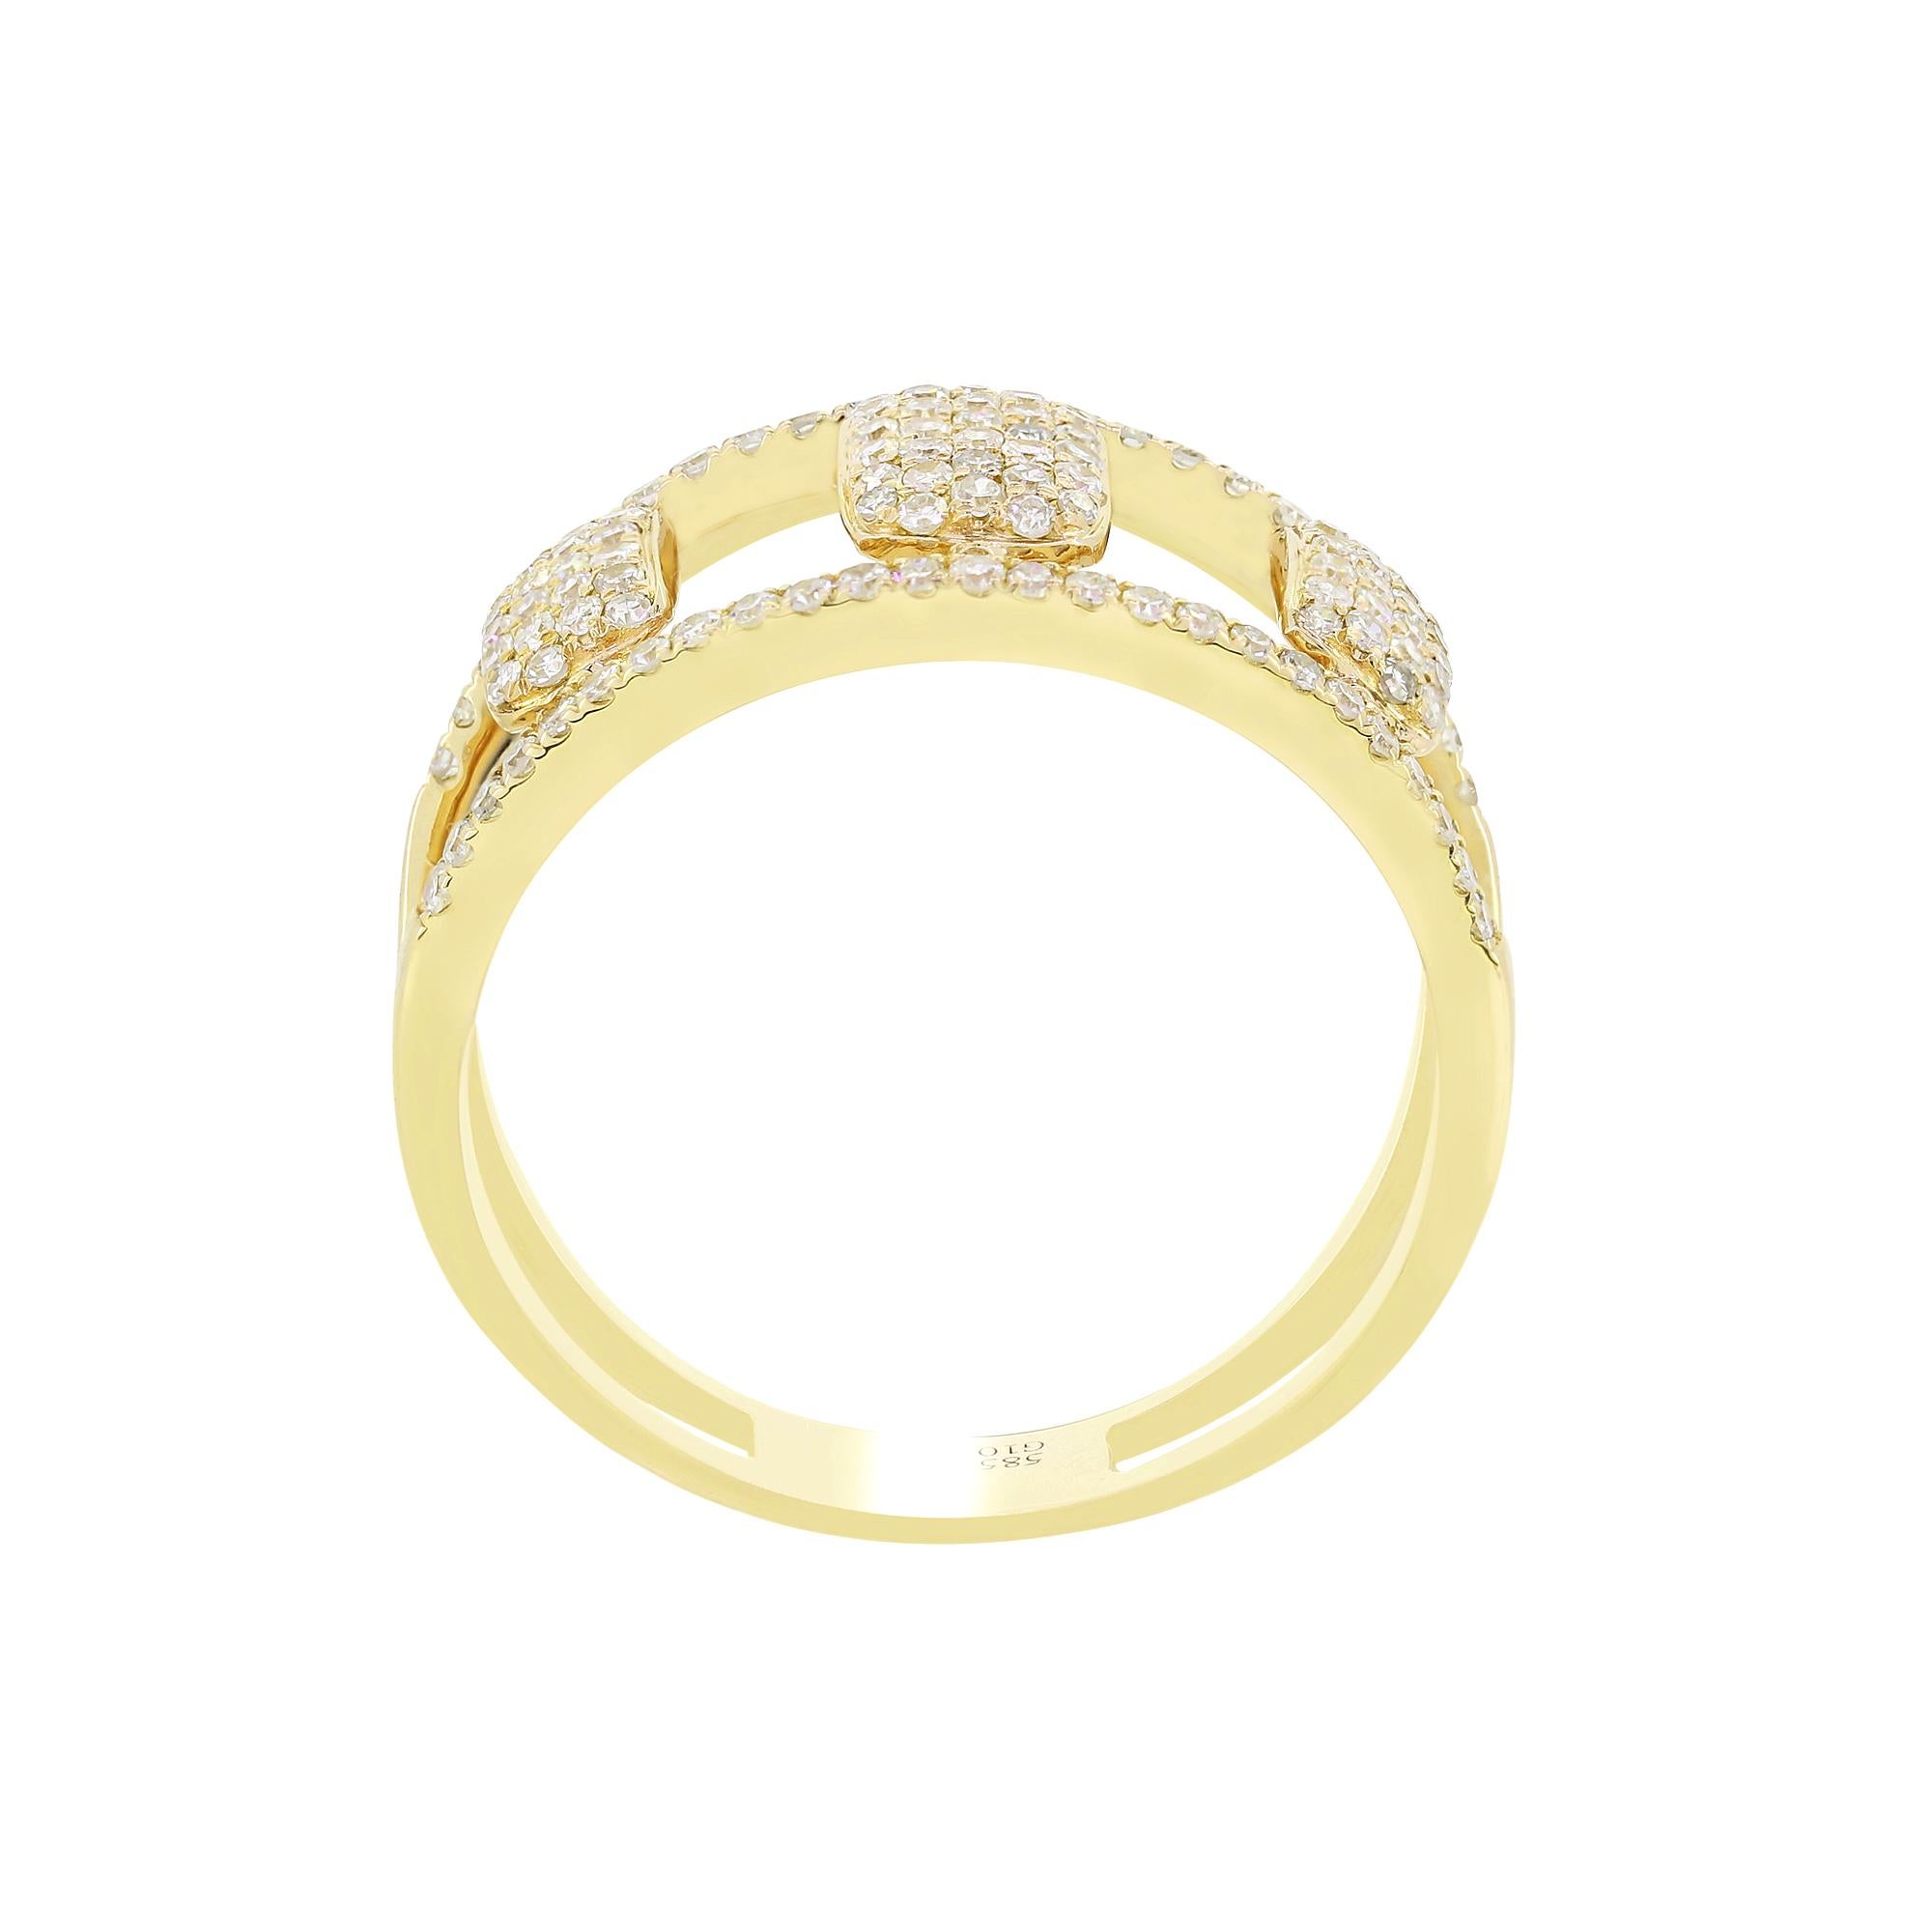 Luxle 0.40 Cttw. Round Pave Diamond Wedding Ring in 14K Yellow Gold In New Condition For Sale In New York, NY